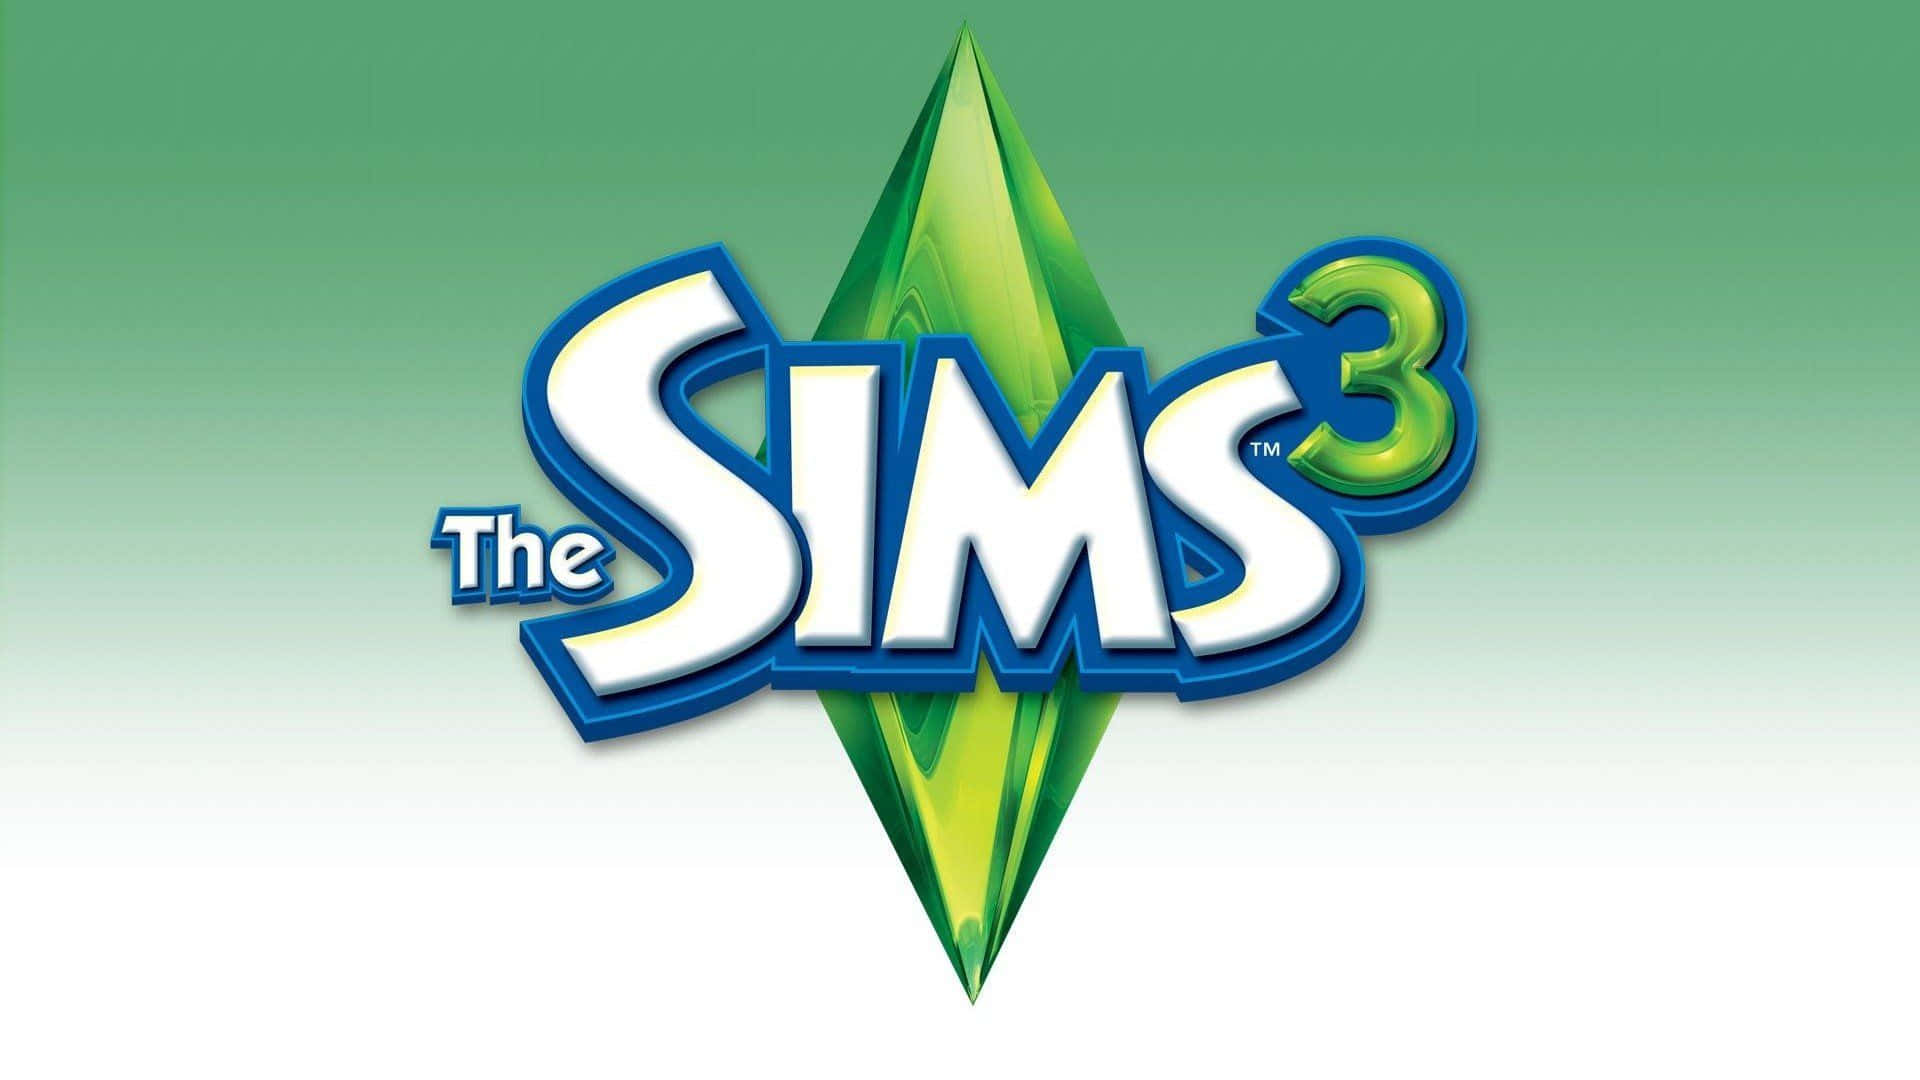 Play Around and Have Fun in The Sims 3 Wallpaper